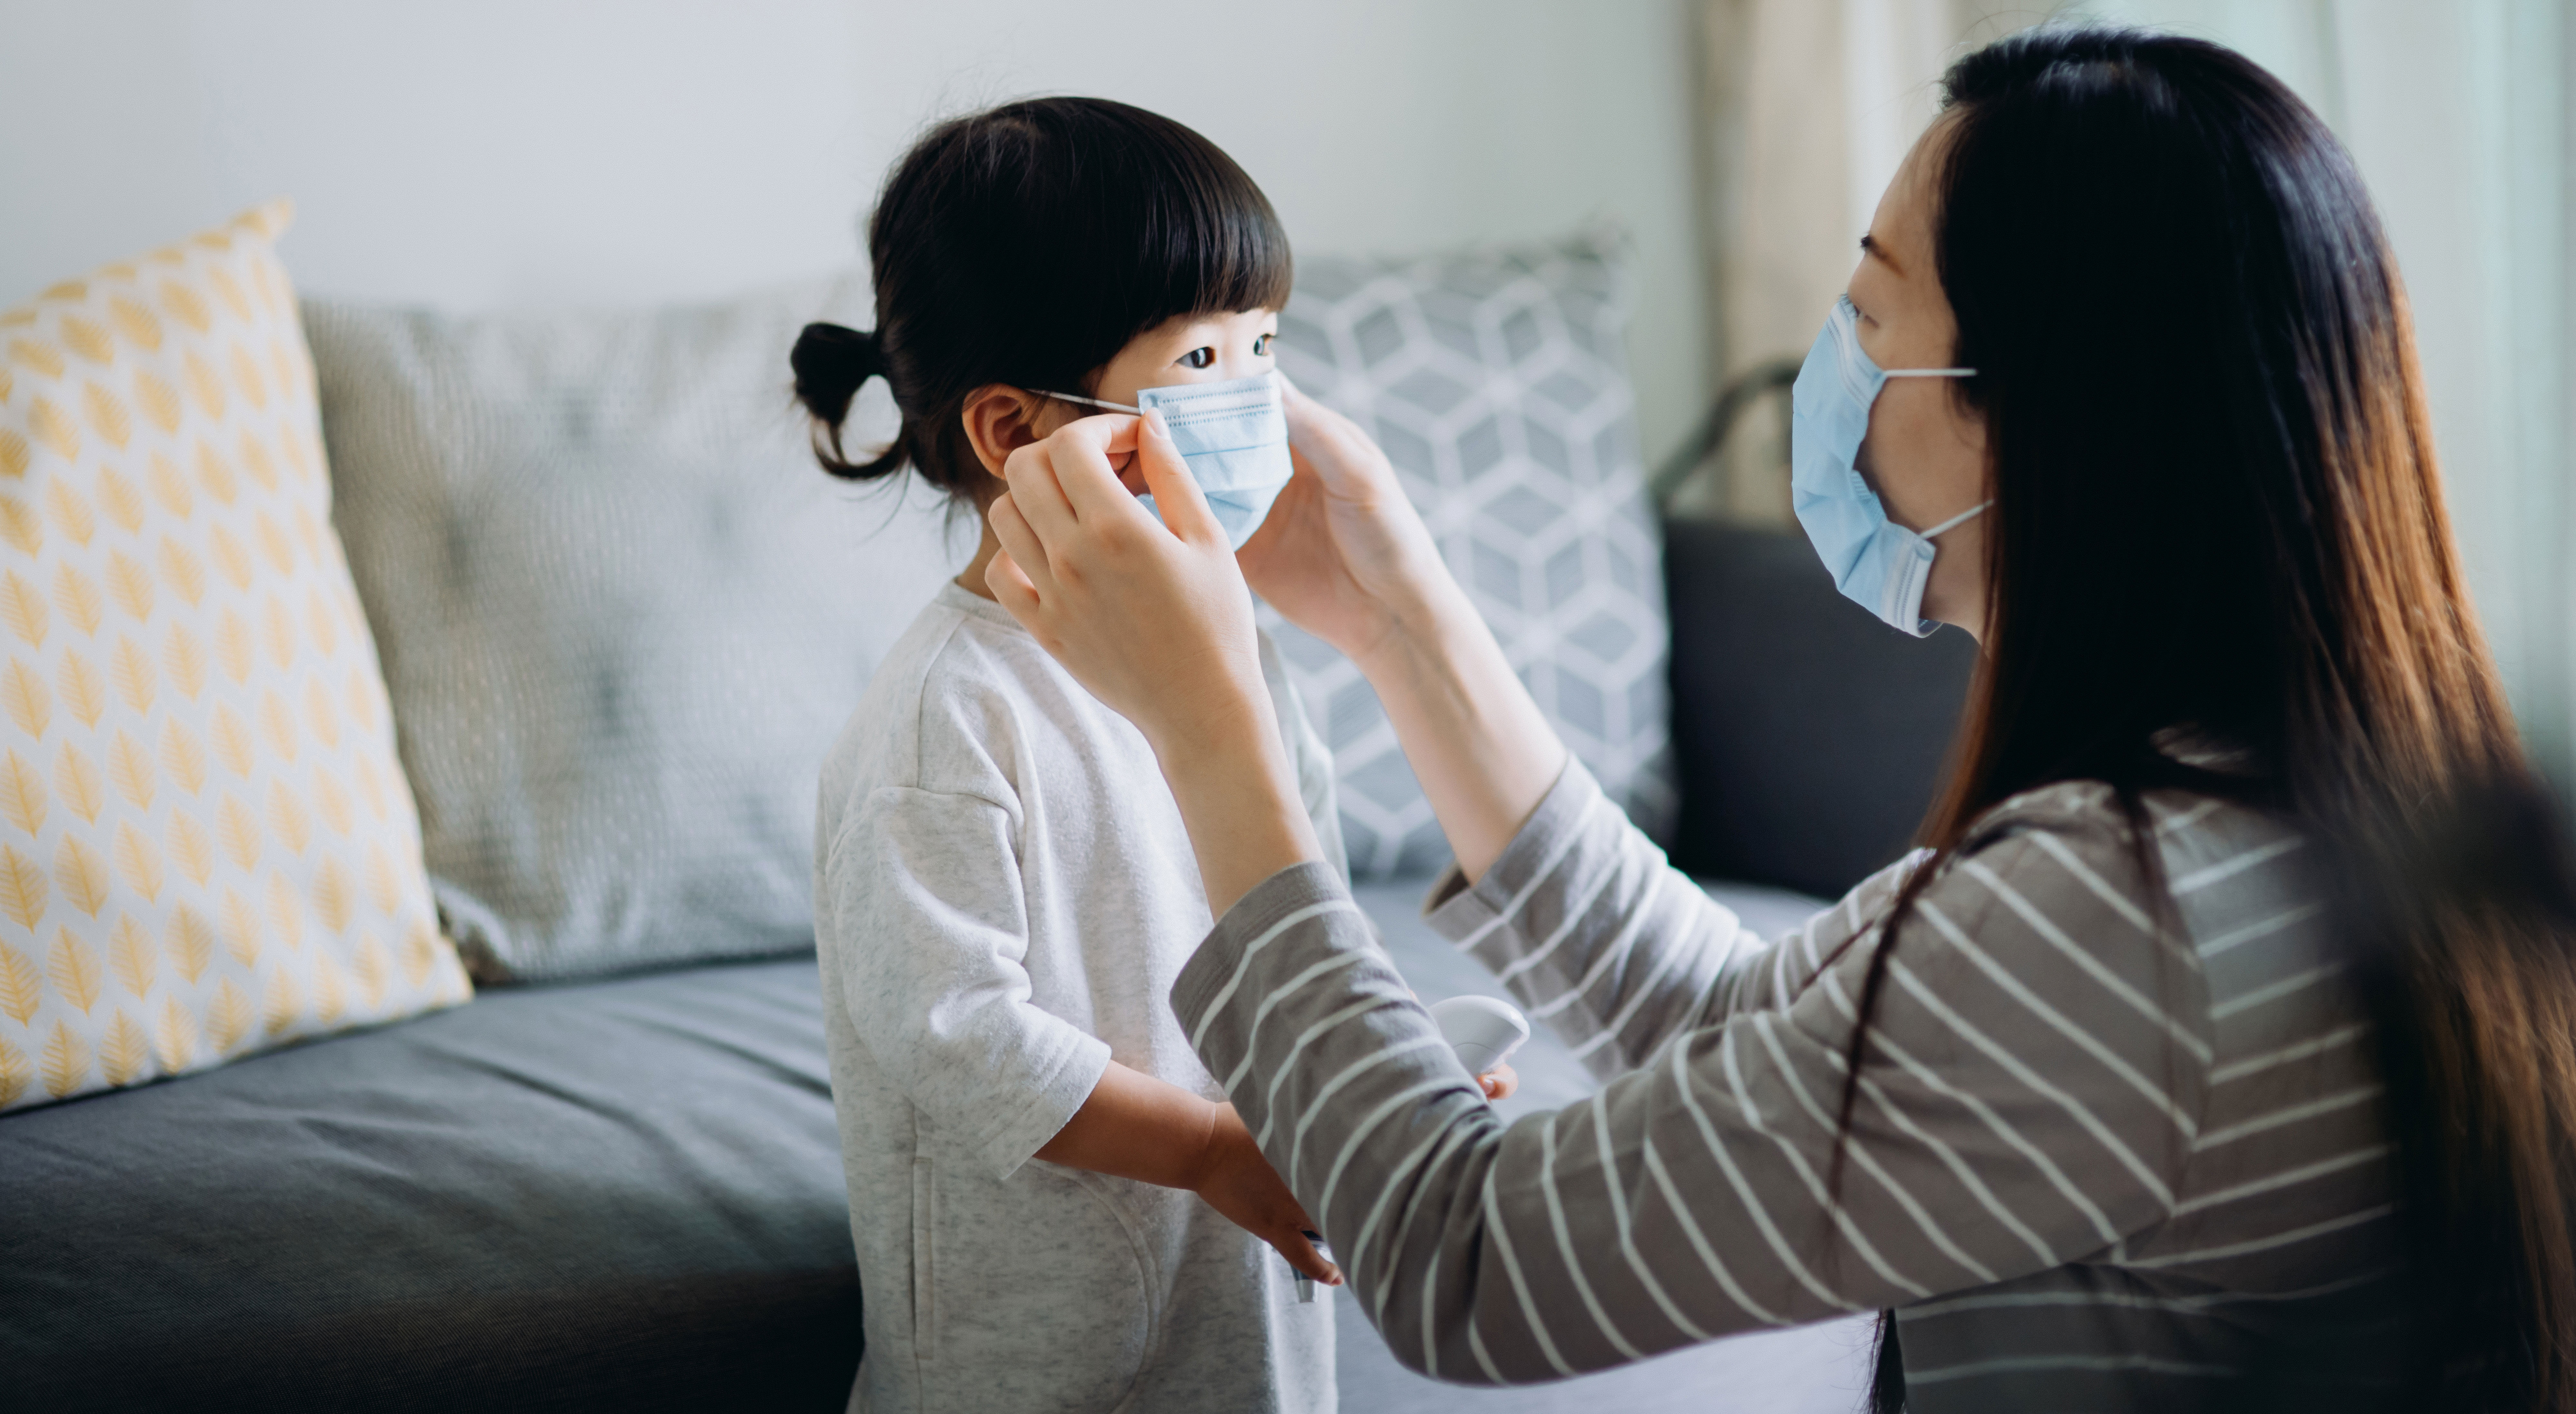 women helps child put on face mask before going outside